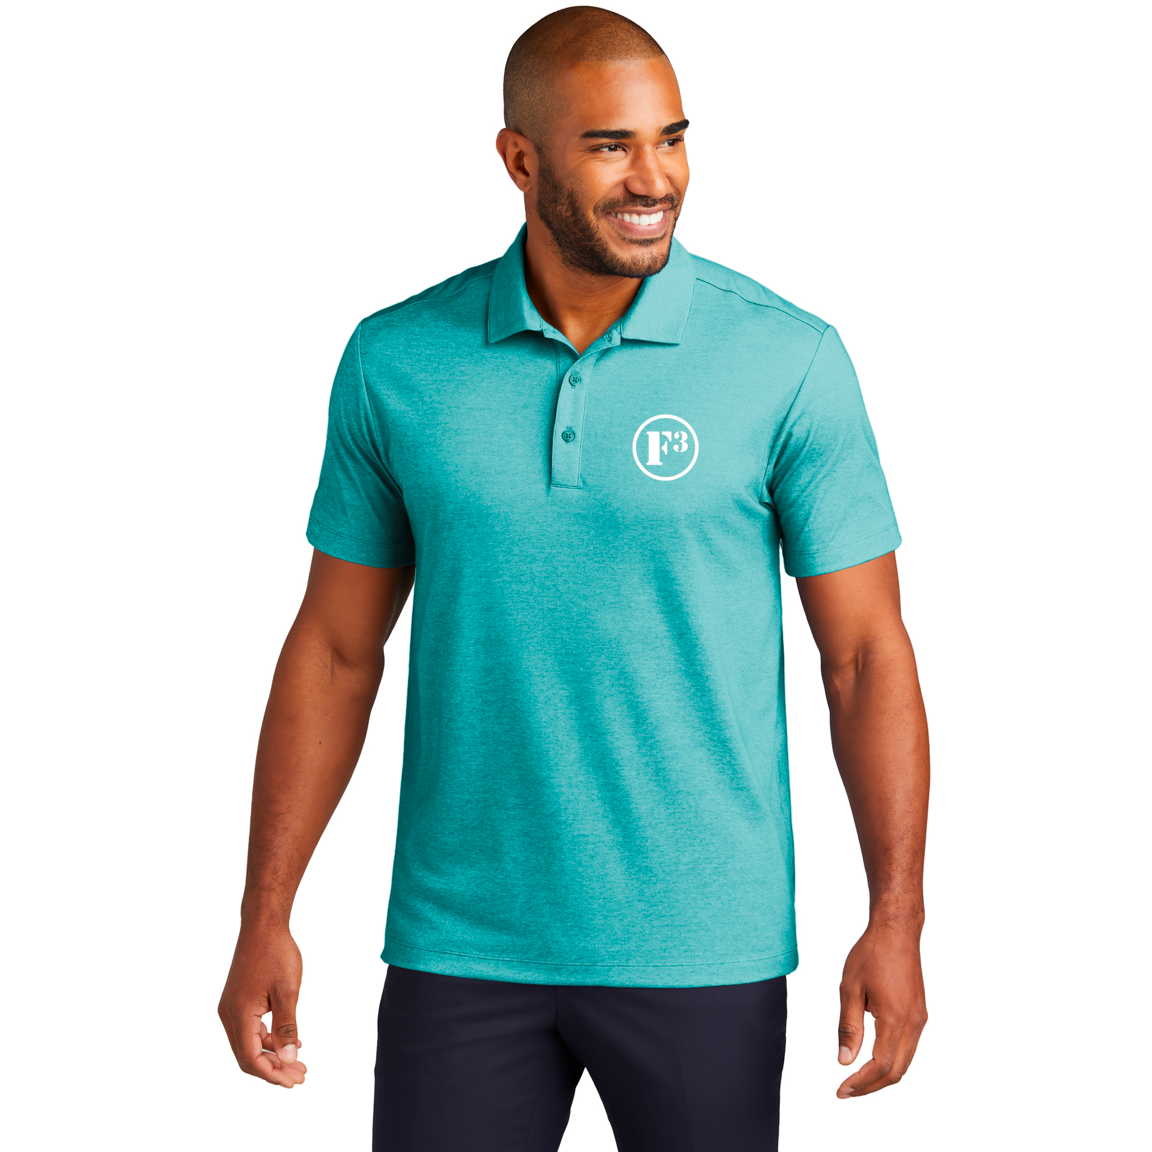 F3 Port Authority Fine Pique Blend Polo - Made to Order